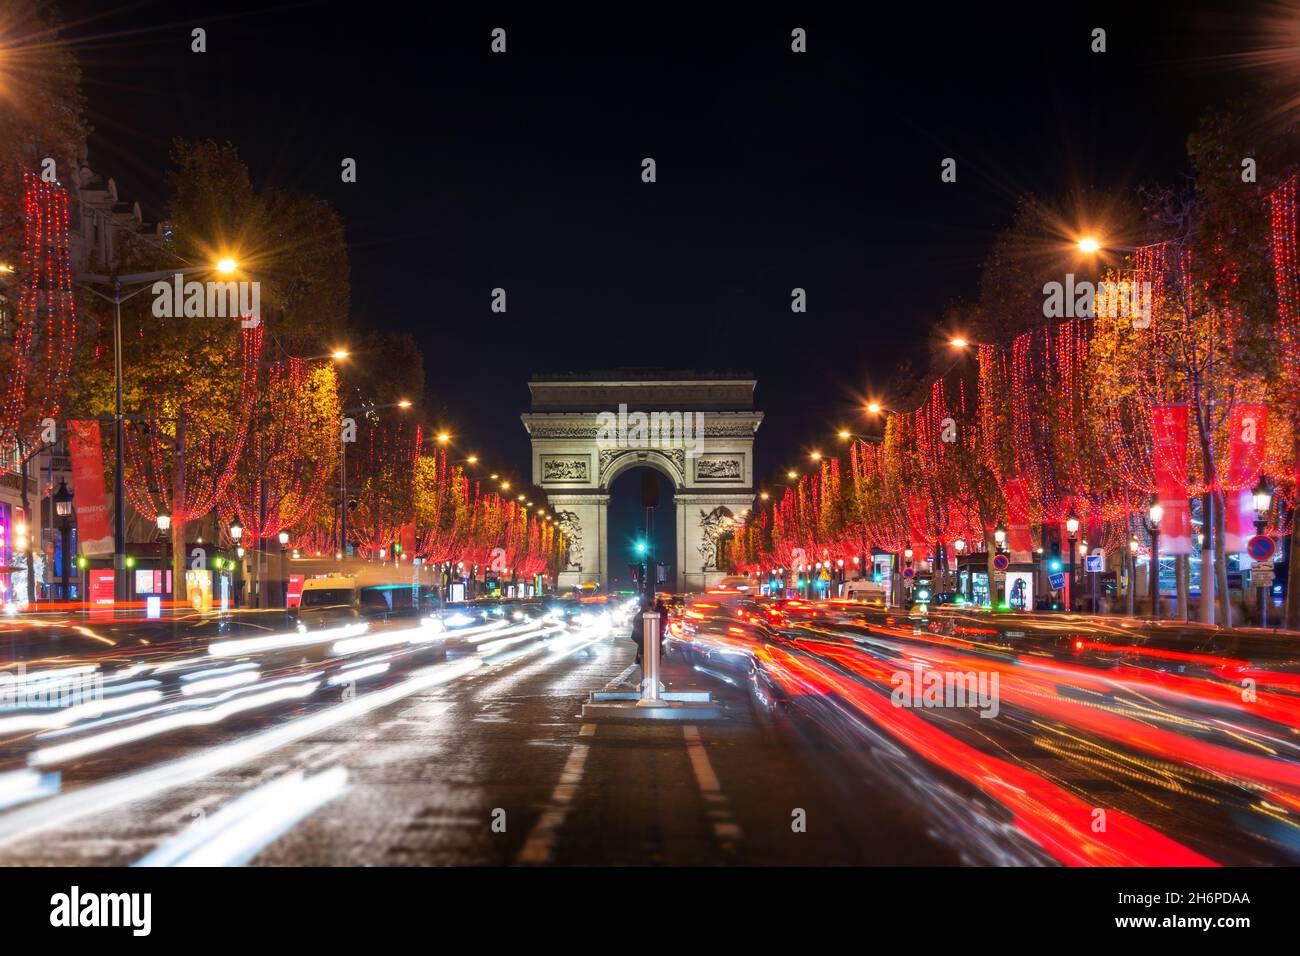 Champs Elysees avenue and the Arc de Triomphe decorated with red Christmas lights at night  in Paris, France. Christmas holidays, winter in Paris. Stock Photo